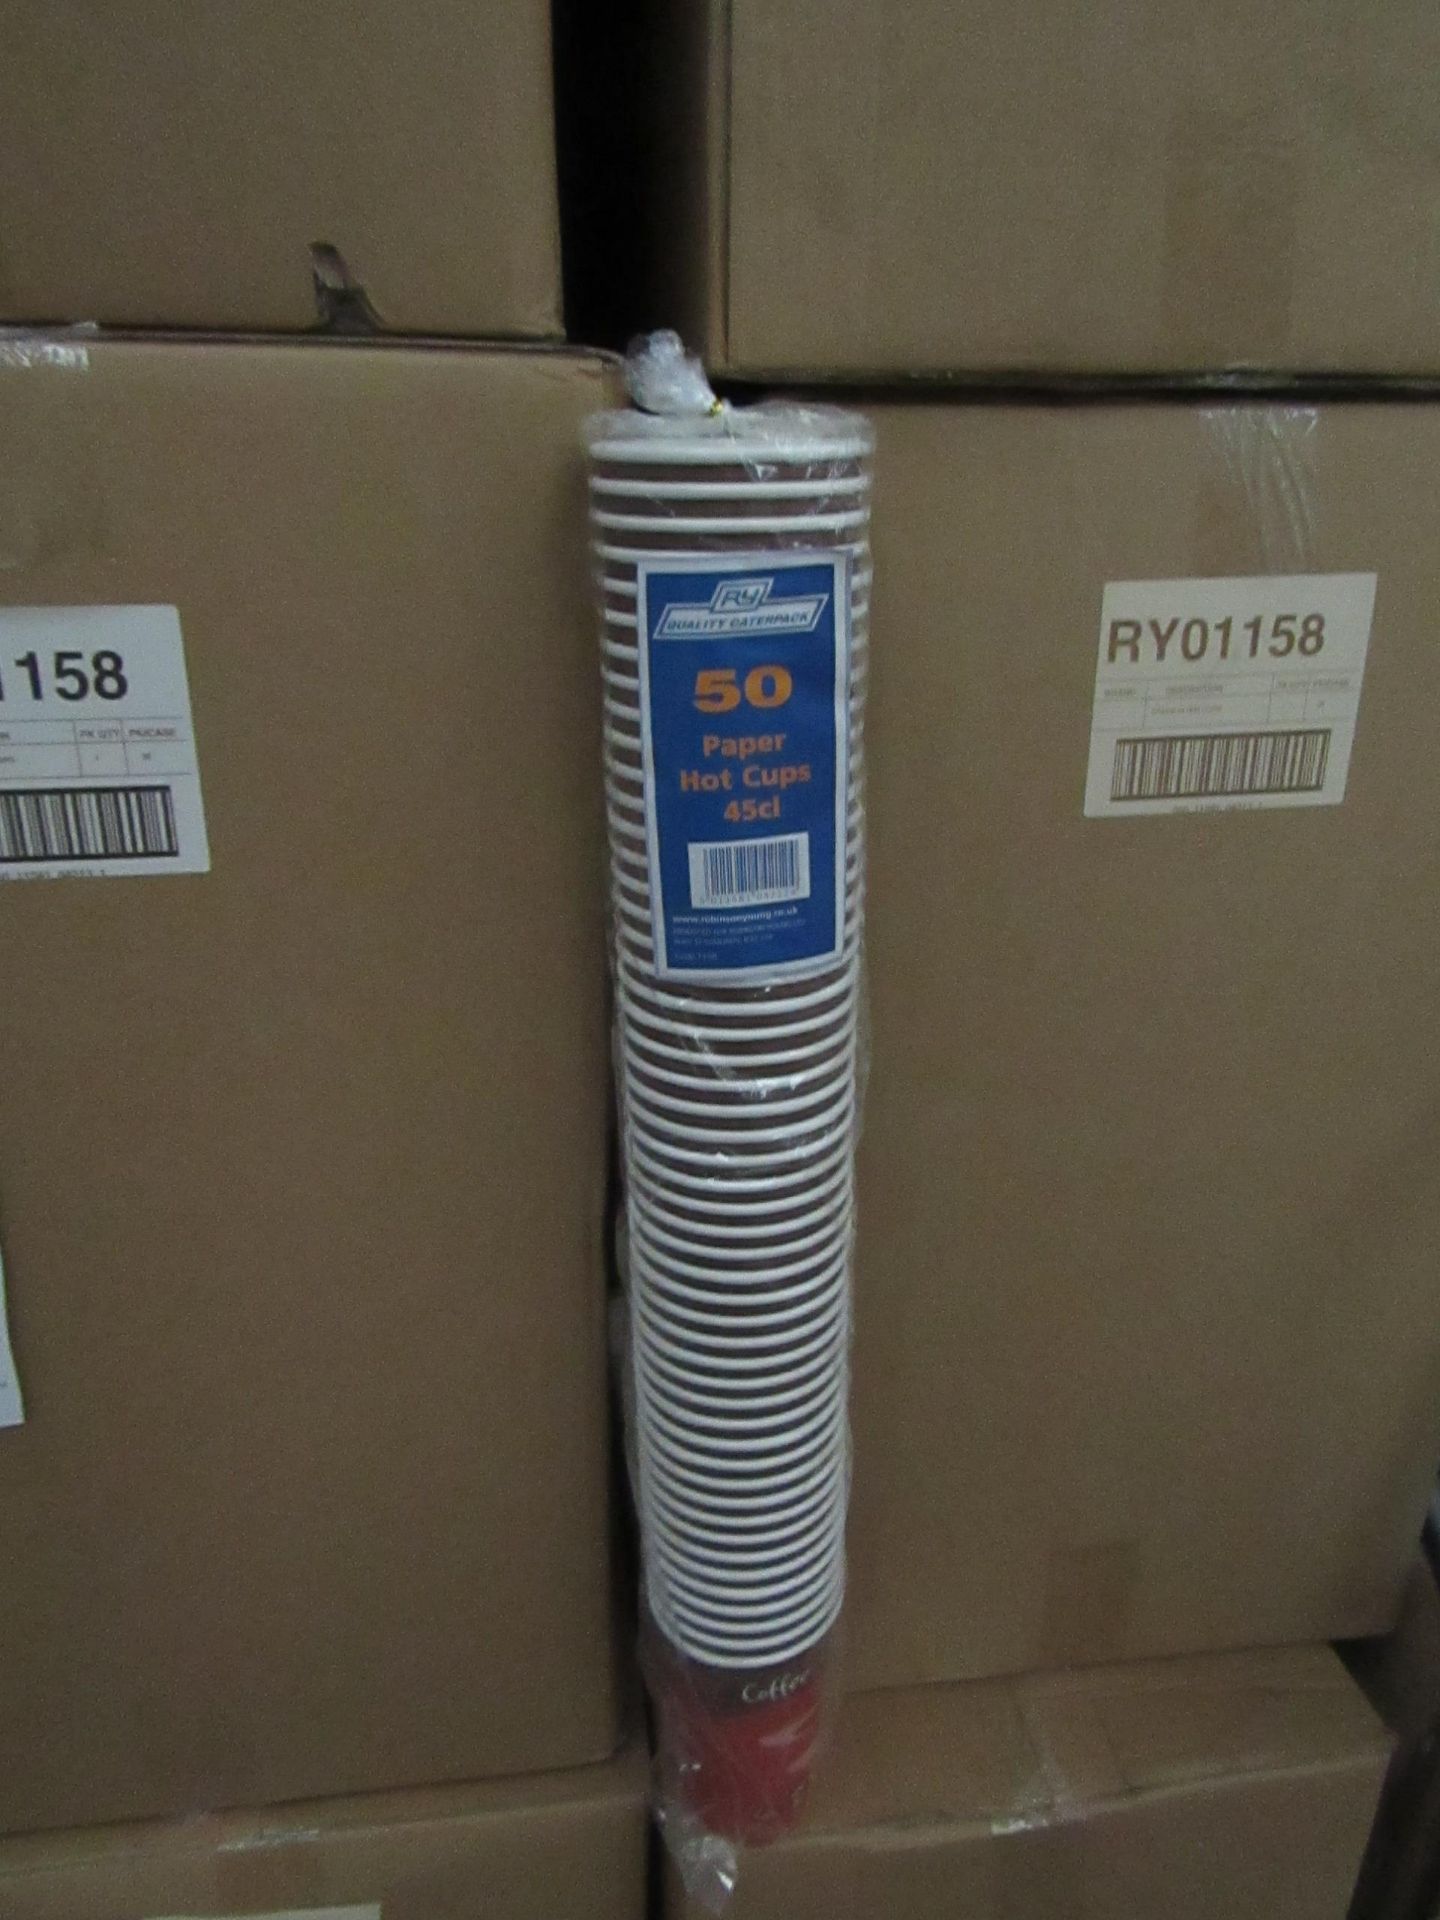 Quality Caterpack - 20 Packs of 50 Disposable Hot Cups - All New & Boxed.